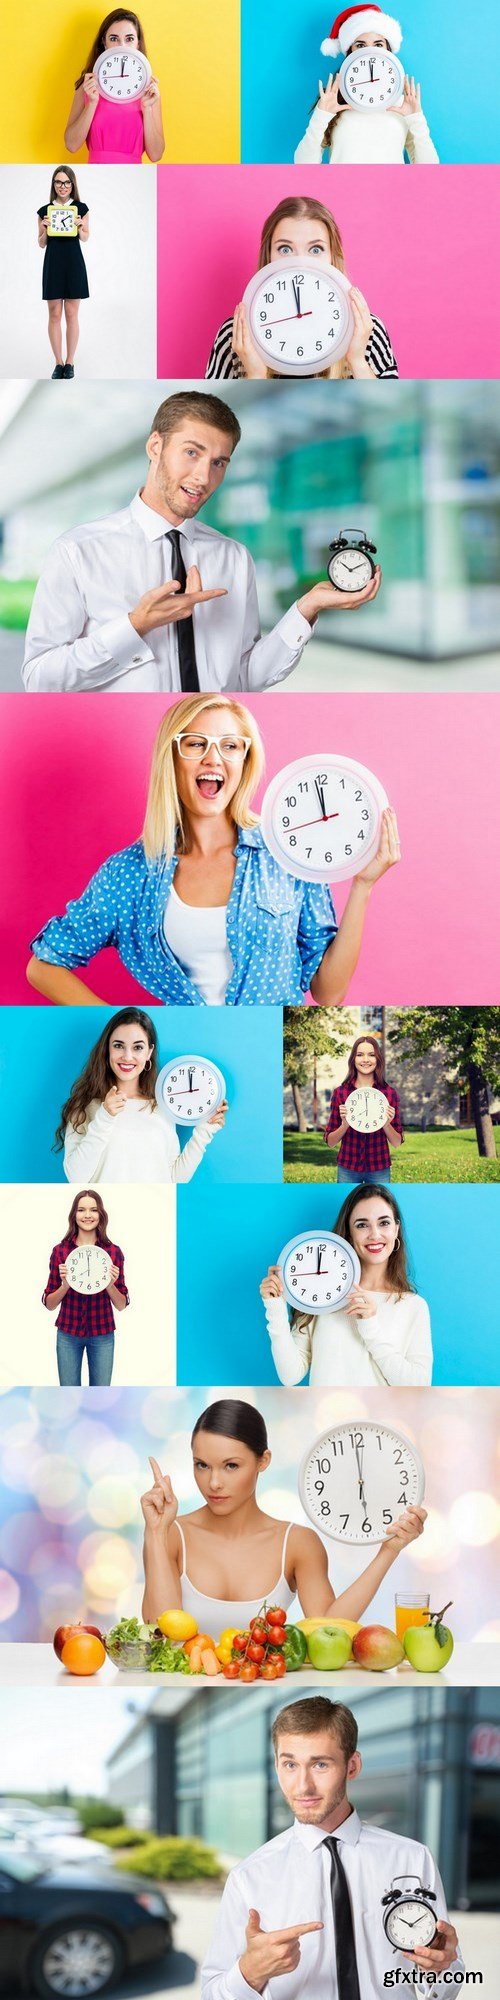 Girl with a clock - 12 EPS Vector Stock